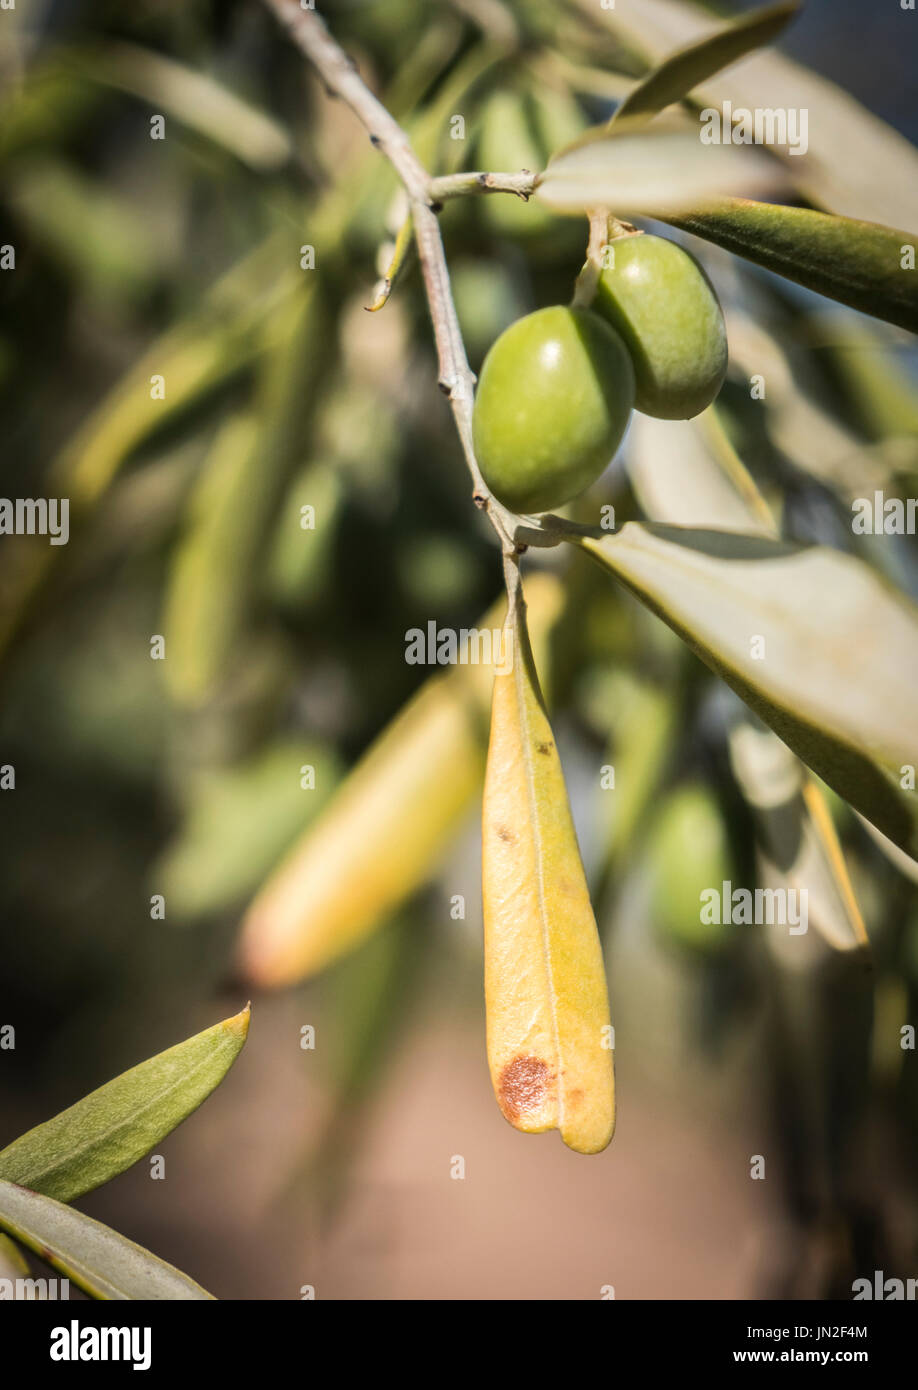 Olive trees infected by the dreaded bacteria called Xylella fastidiosa, is known in Europe as the ebola of the olive tree, Jaen, Andalucia, Spain Stock Photo